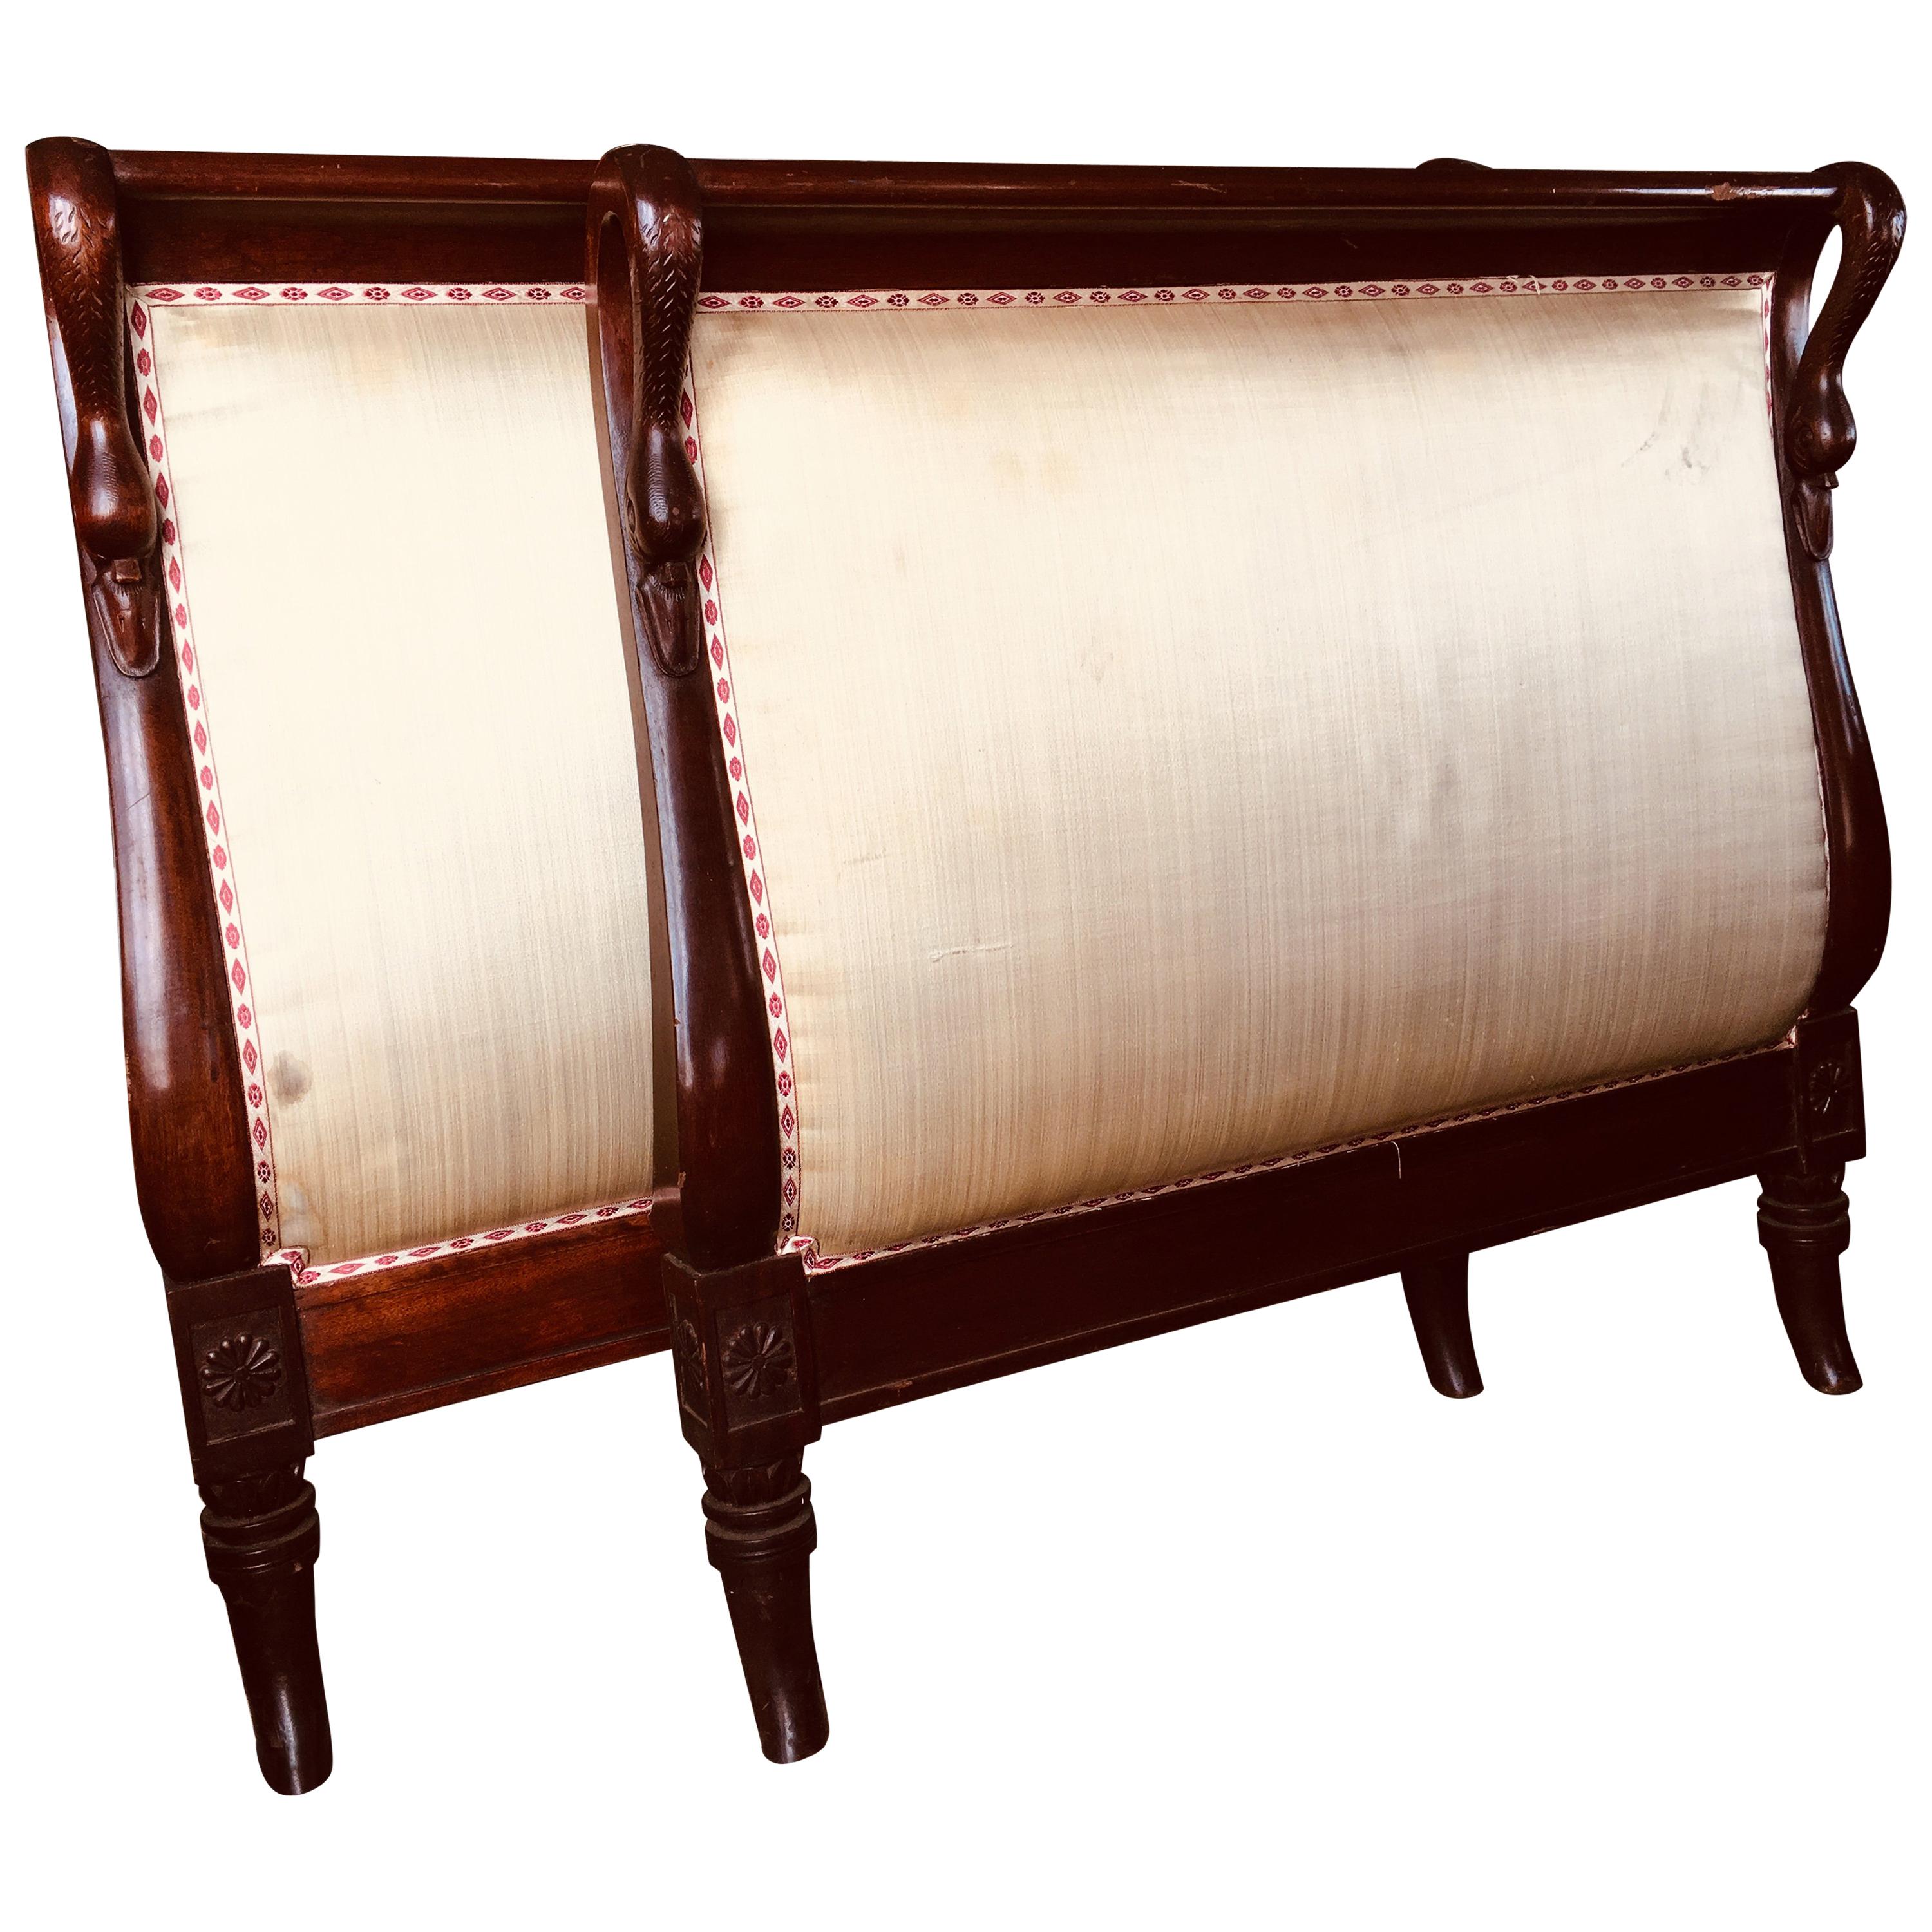 19th Century French Hand-Carved Mahogany Single Bed with Swans Heads